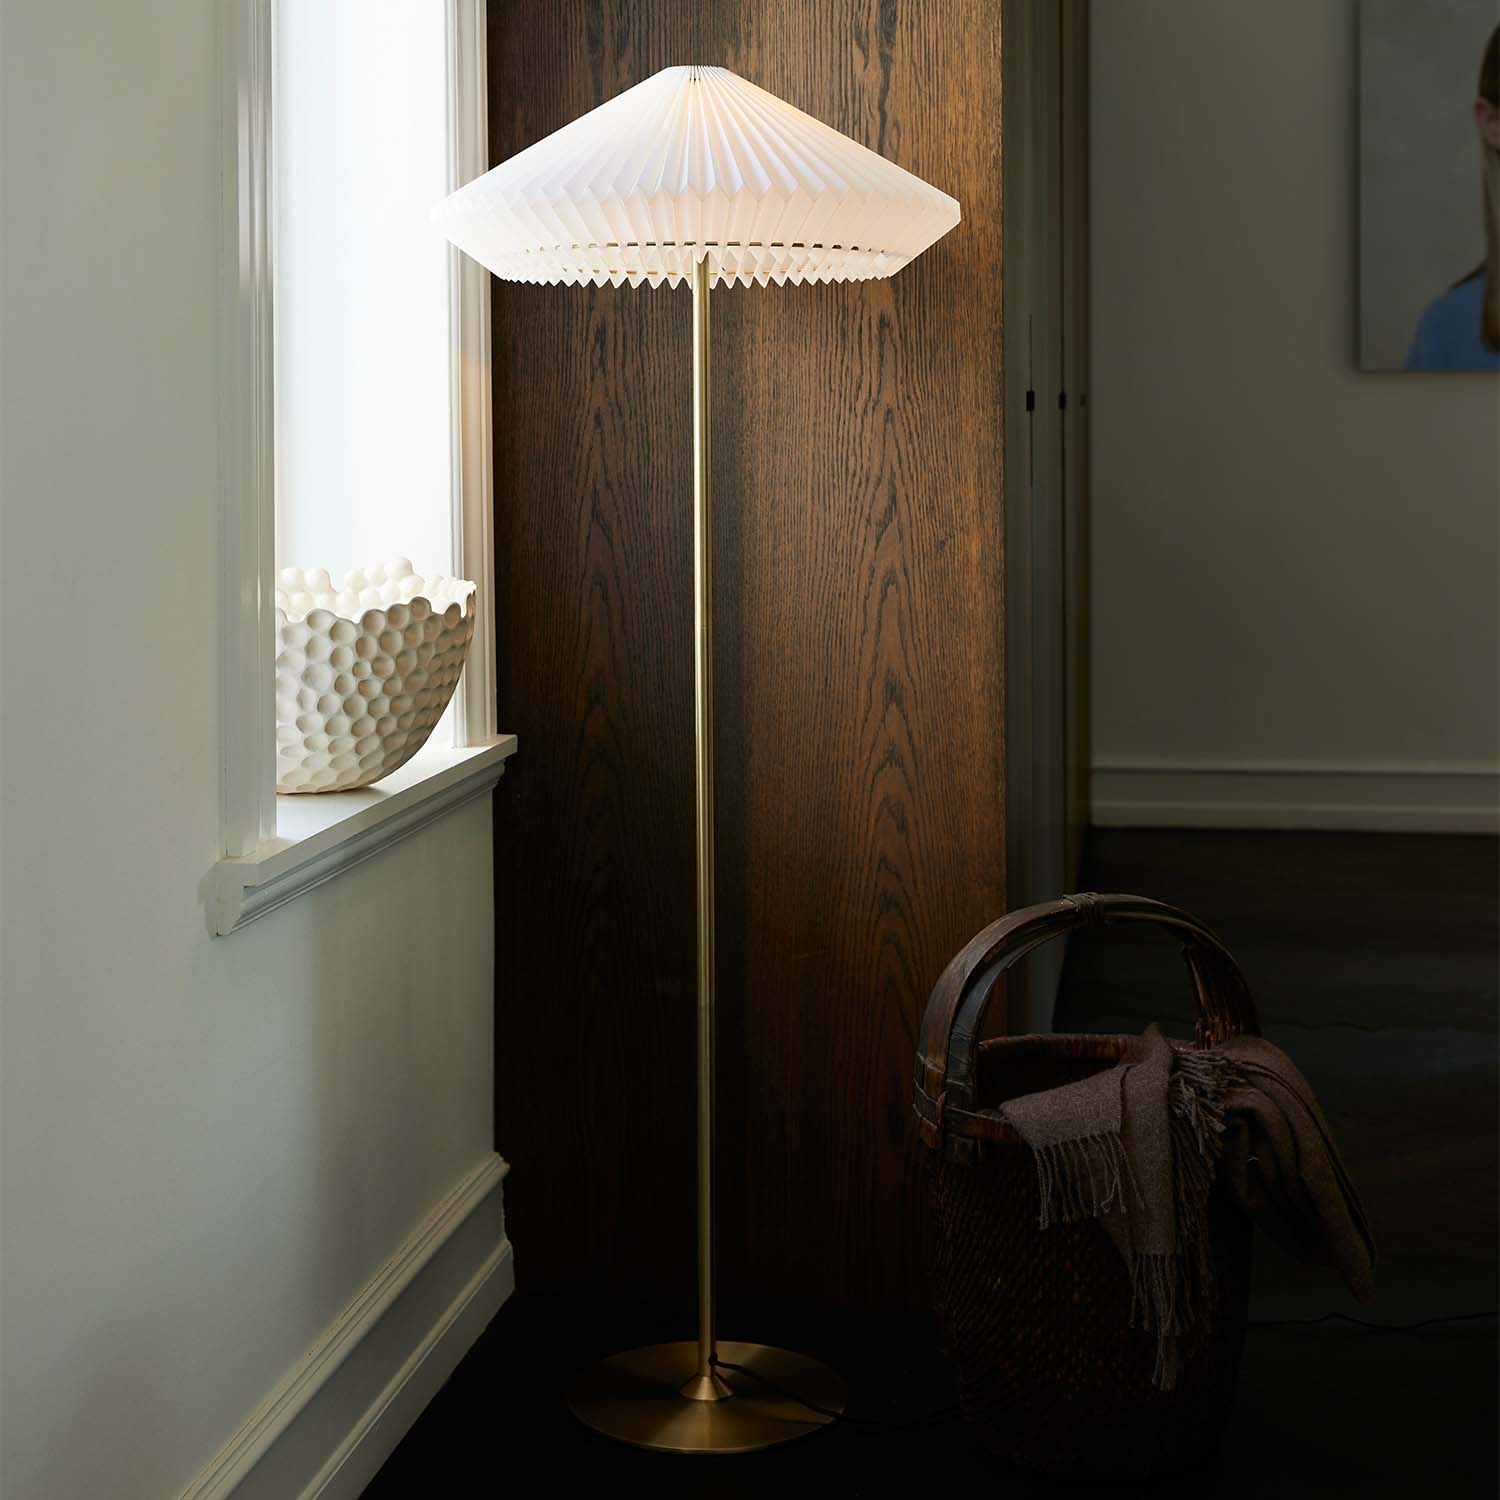 PARIS - Vintage pleated floor lamp with conical design